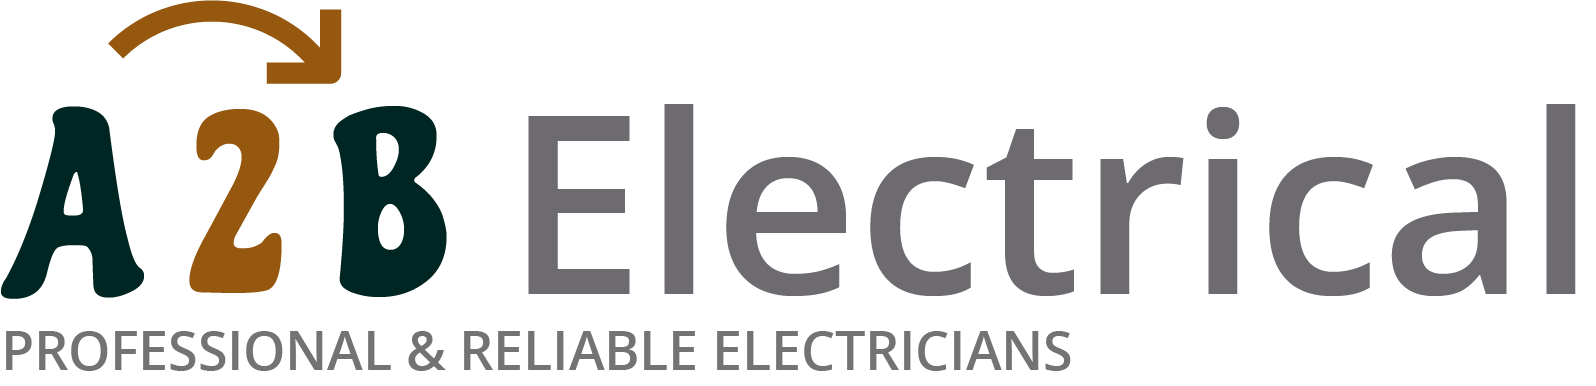 If you have electrical wiring problems in Hornsey, we can provide an electrician to have a look for you. 